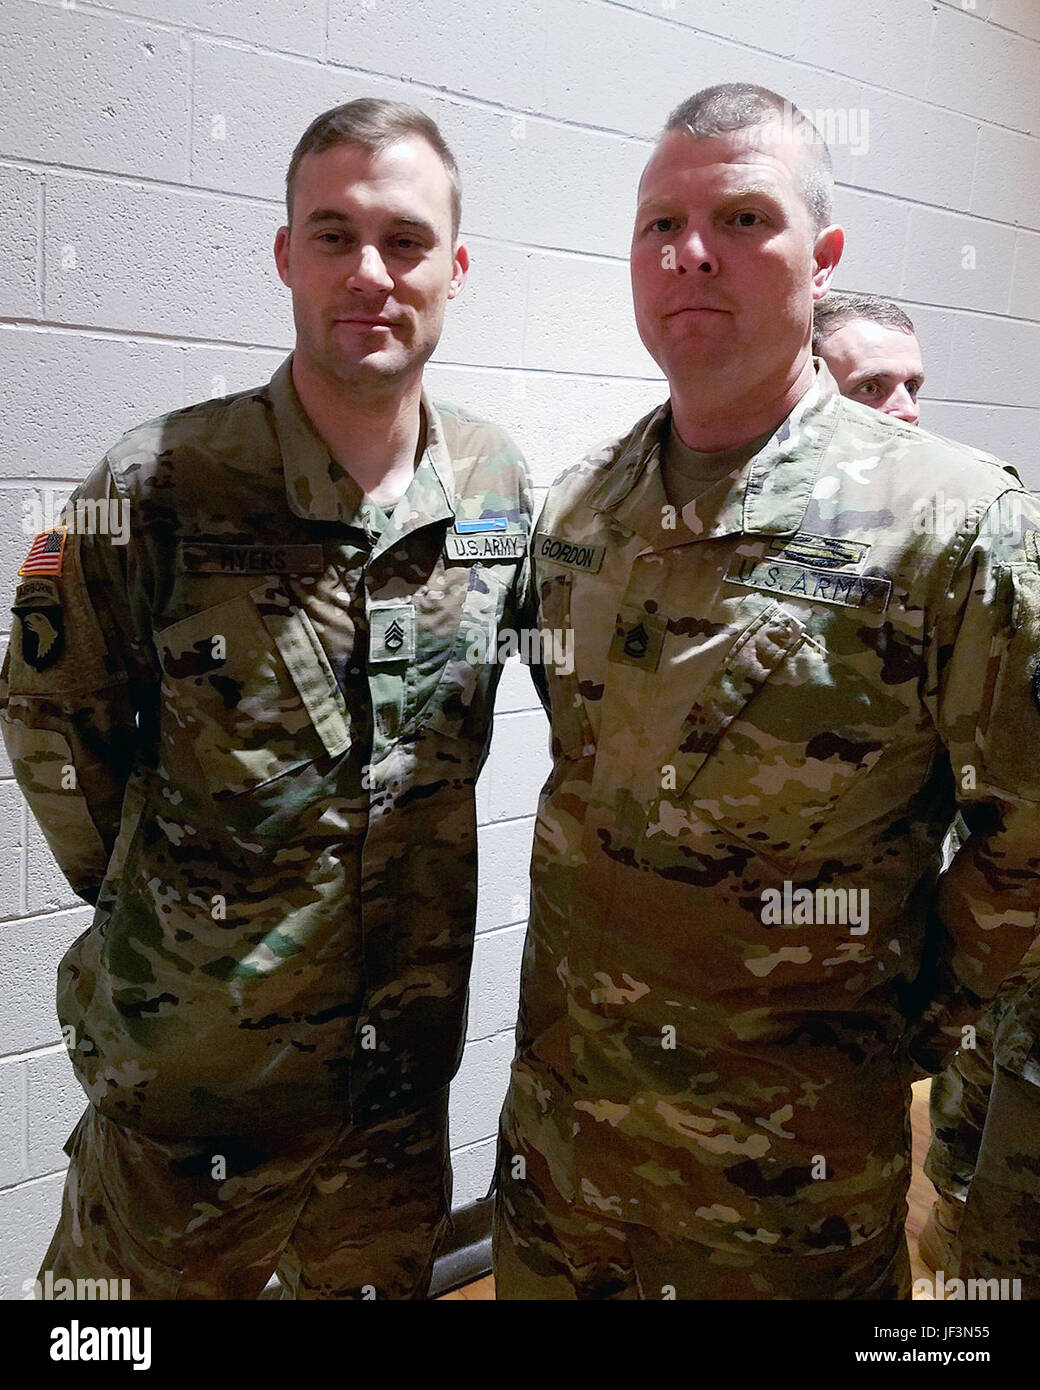 Army Reserve Staff Sgt. Clint Myers, a Kingsport, Tennessee native, stands with Sgt. 1st Class Eric Gordon after receiving his Expert Infantry Badge at McCrady Training Center in Eastover, S.C. on March 31, 2017. Myers earned the prestigious EIB after completing the two-week preparation course and grueling 5-day competition, which Gordon encouraged him to do. Myers started his EIB journey along with 122 other Soldiers. Upon completion of the competition, only 17 Soldiers earned the EIB, and Myers was the only Reserve Soldier among them. (U.S. Army Reserve Photo by Chaplain (Capt.) Caleb Wright Stock Photo